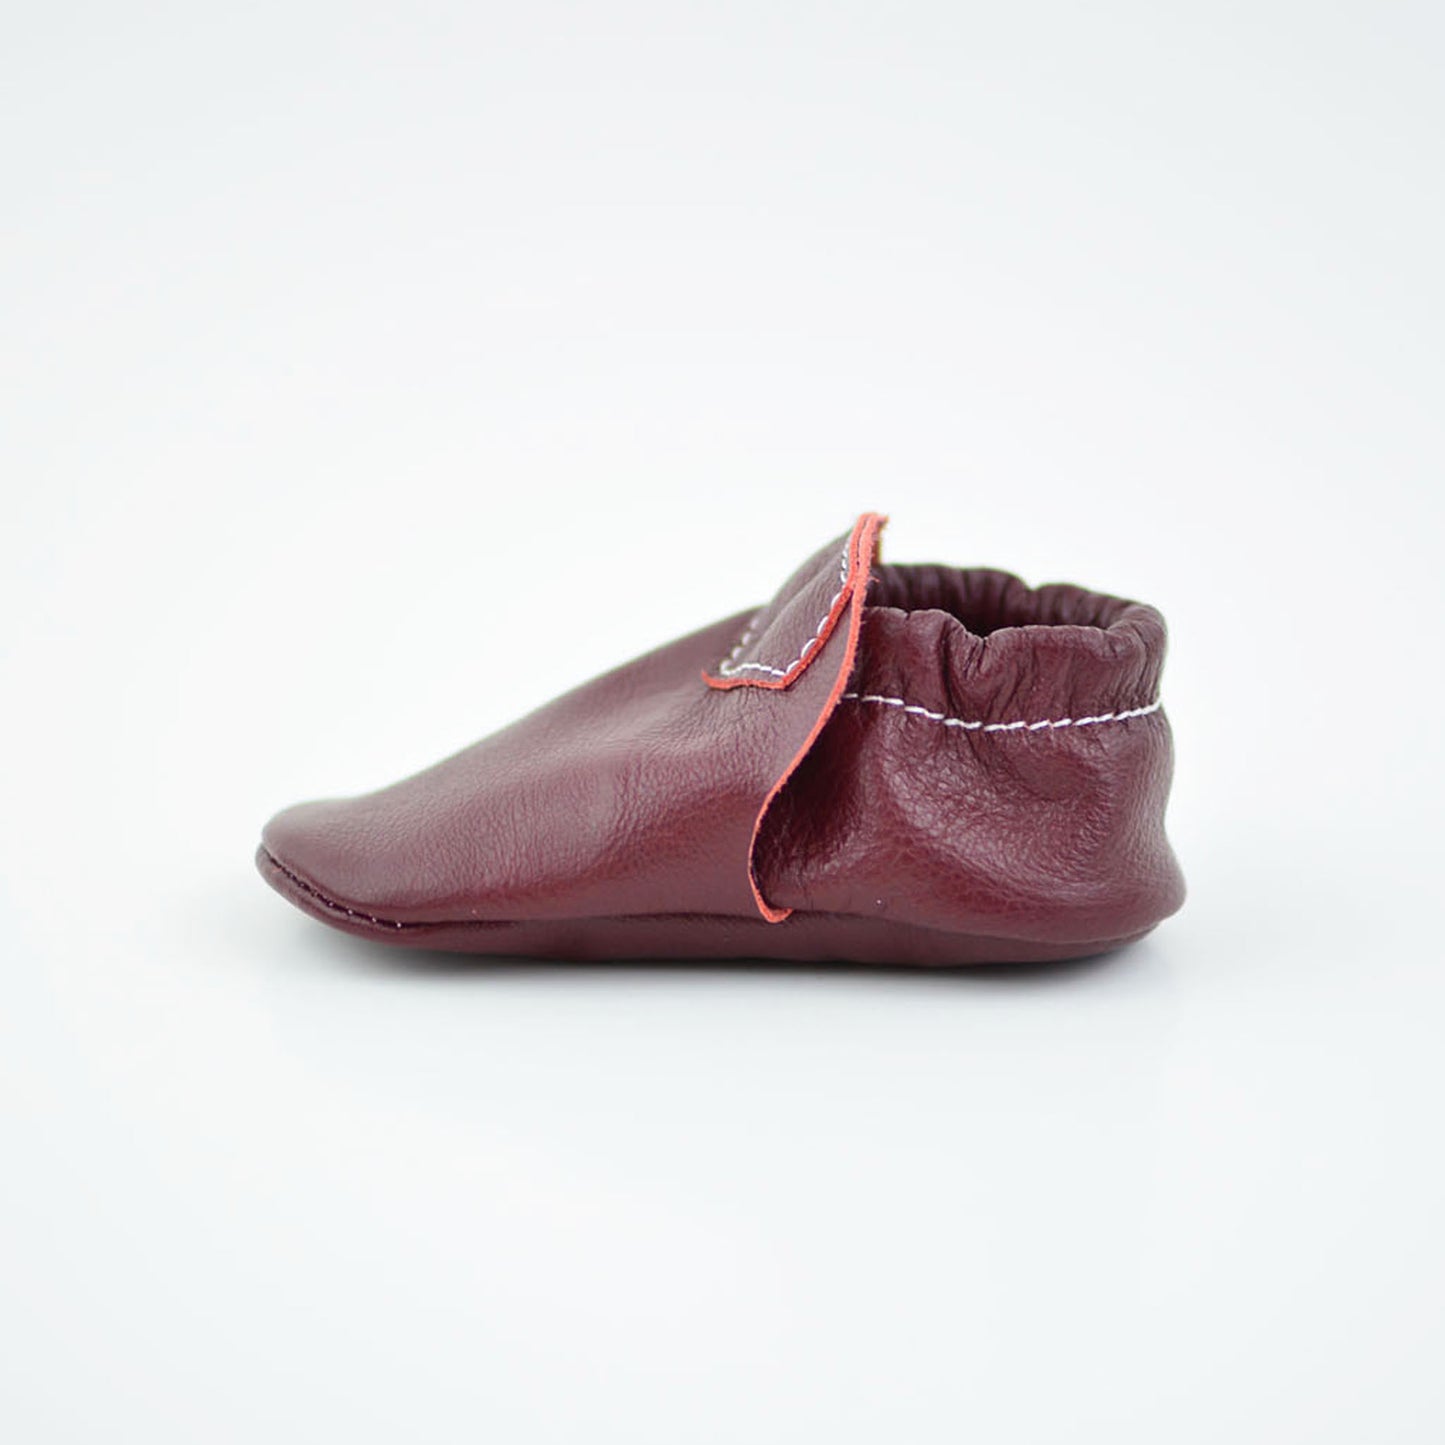 RTS Burgundy Lokicks With Same Leather Soles - Size 3 (12-18M)(5")